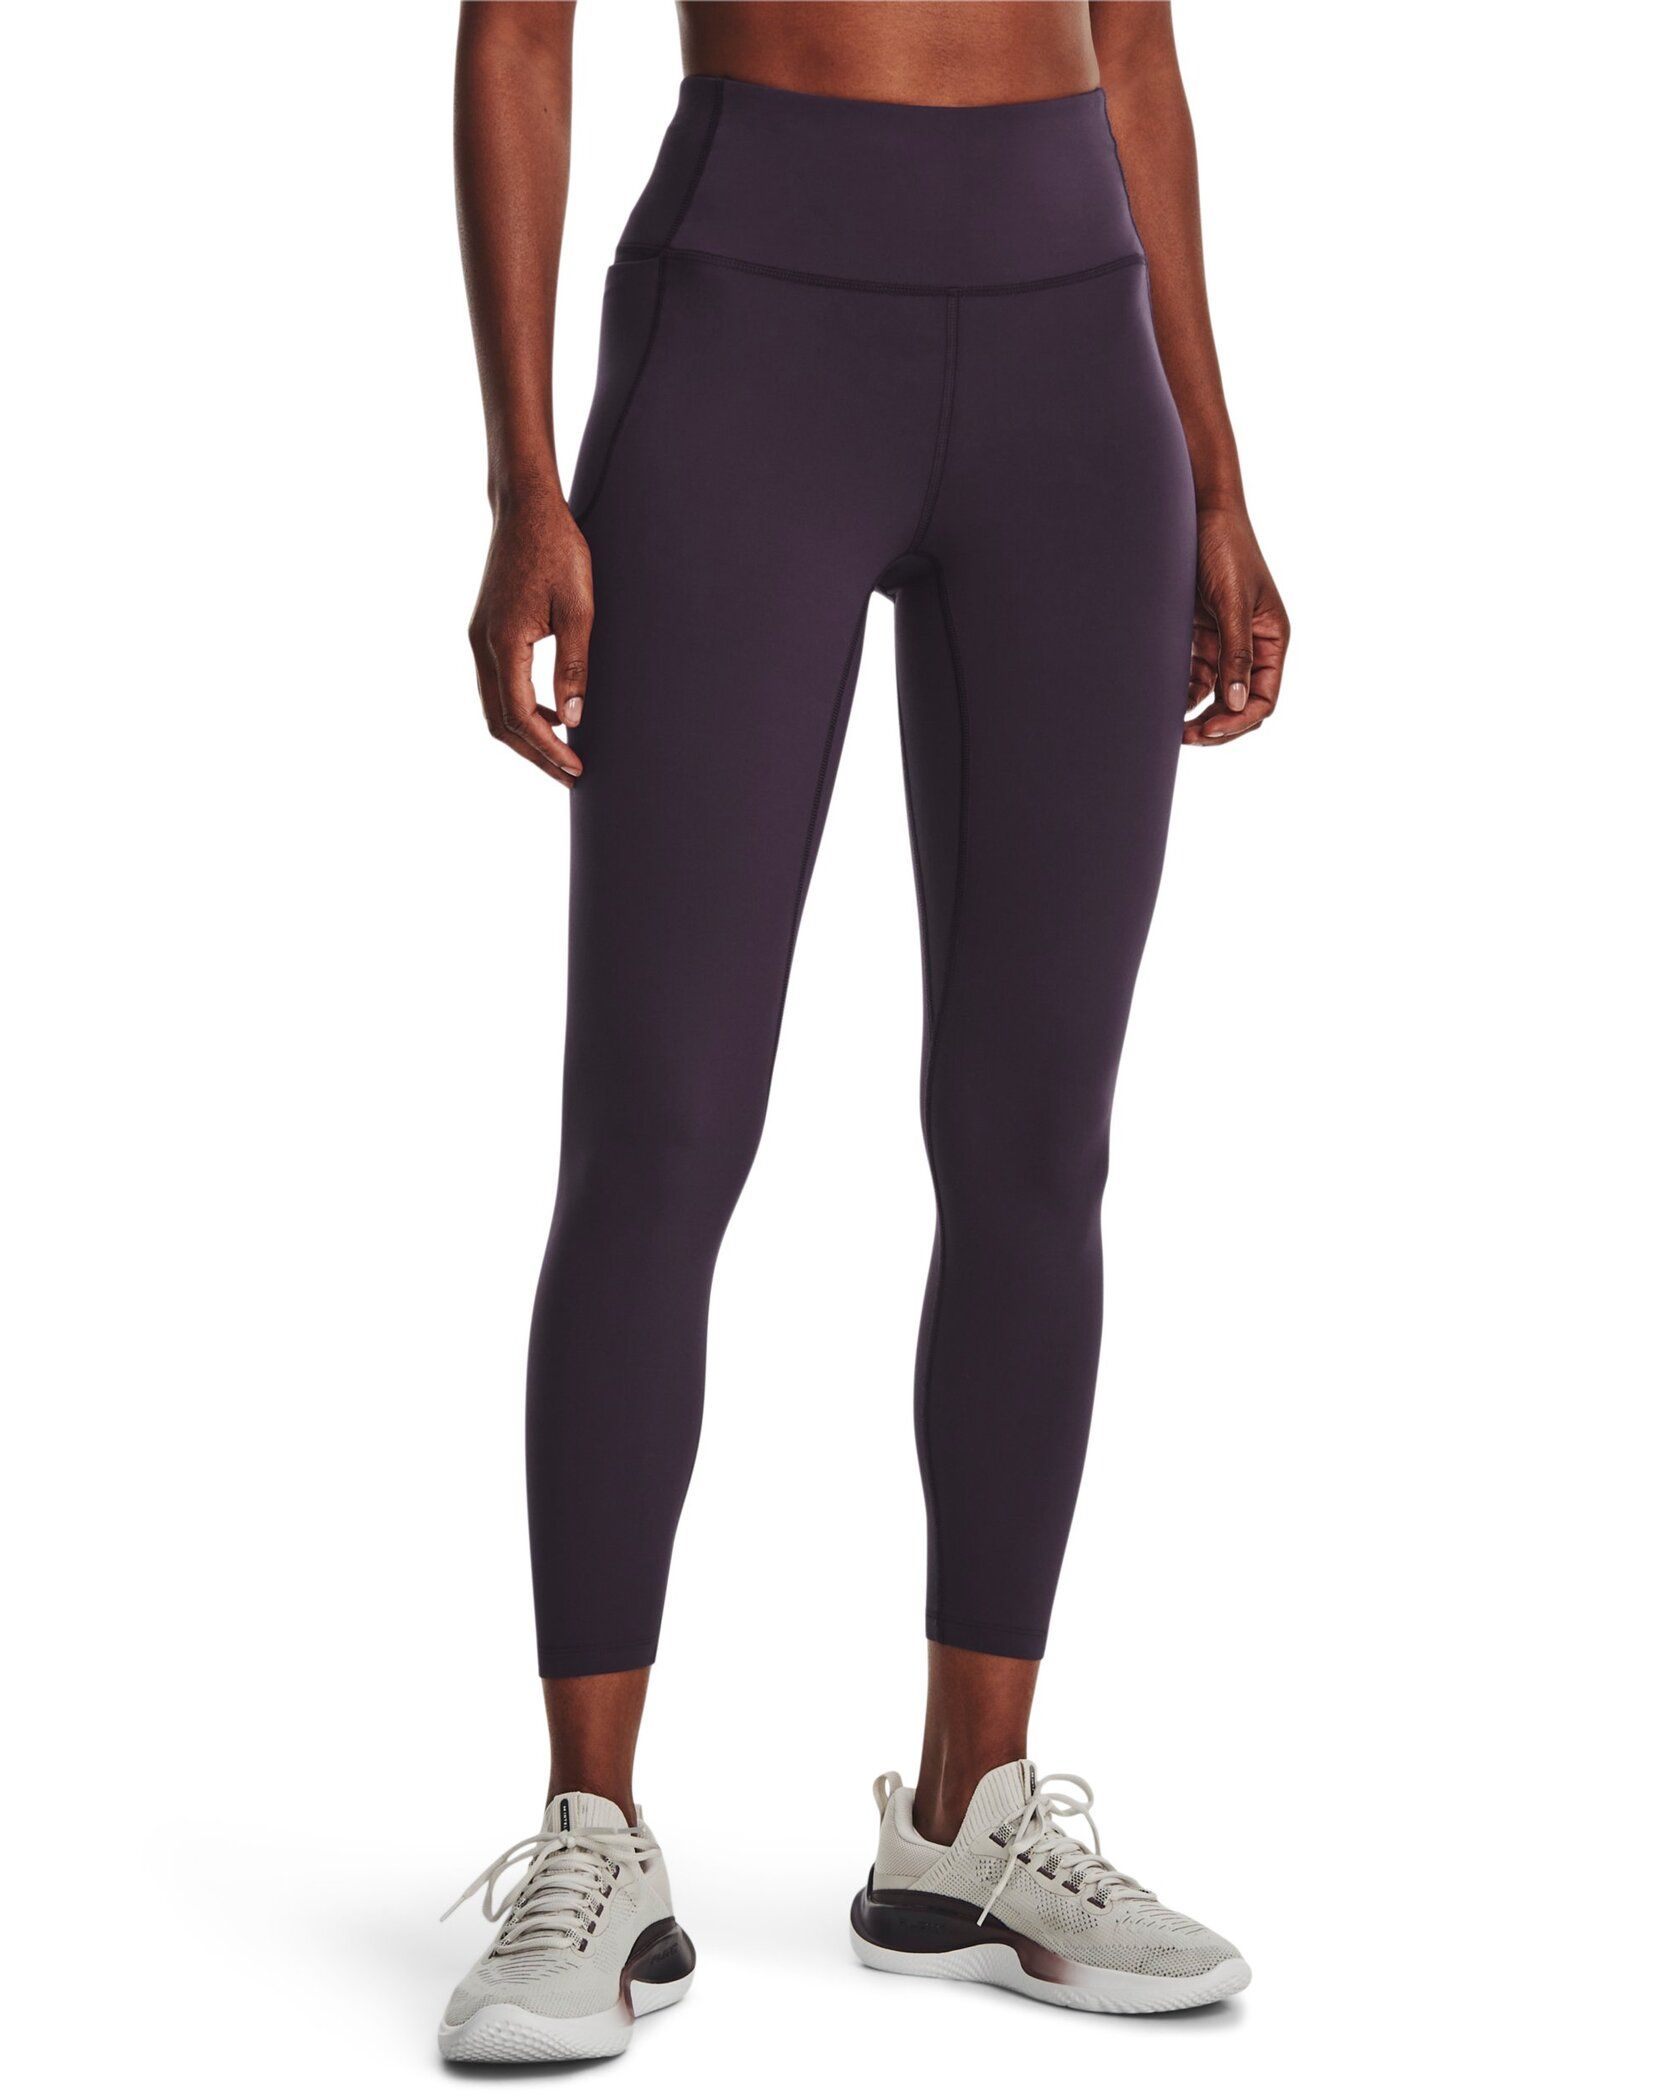 Buy Under Armour Motion Ankle Leggings Online | ZALORA Malaysia